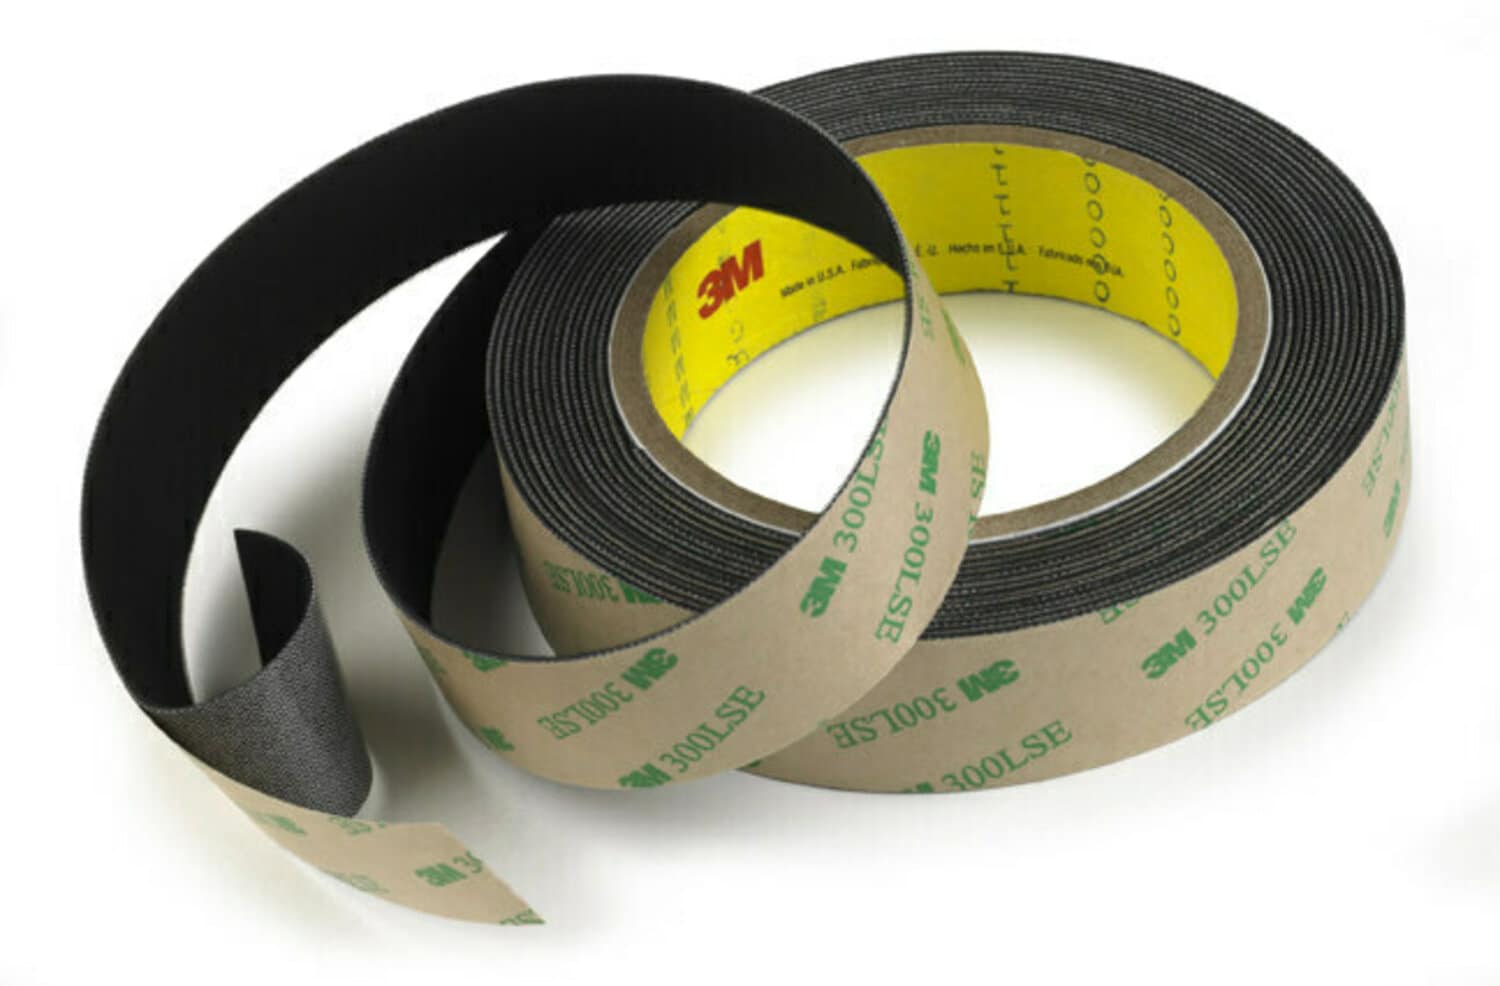 7100048987 - 3M Gripping Material GM641, Black, 24 in x 72 yd, 1 roll per case